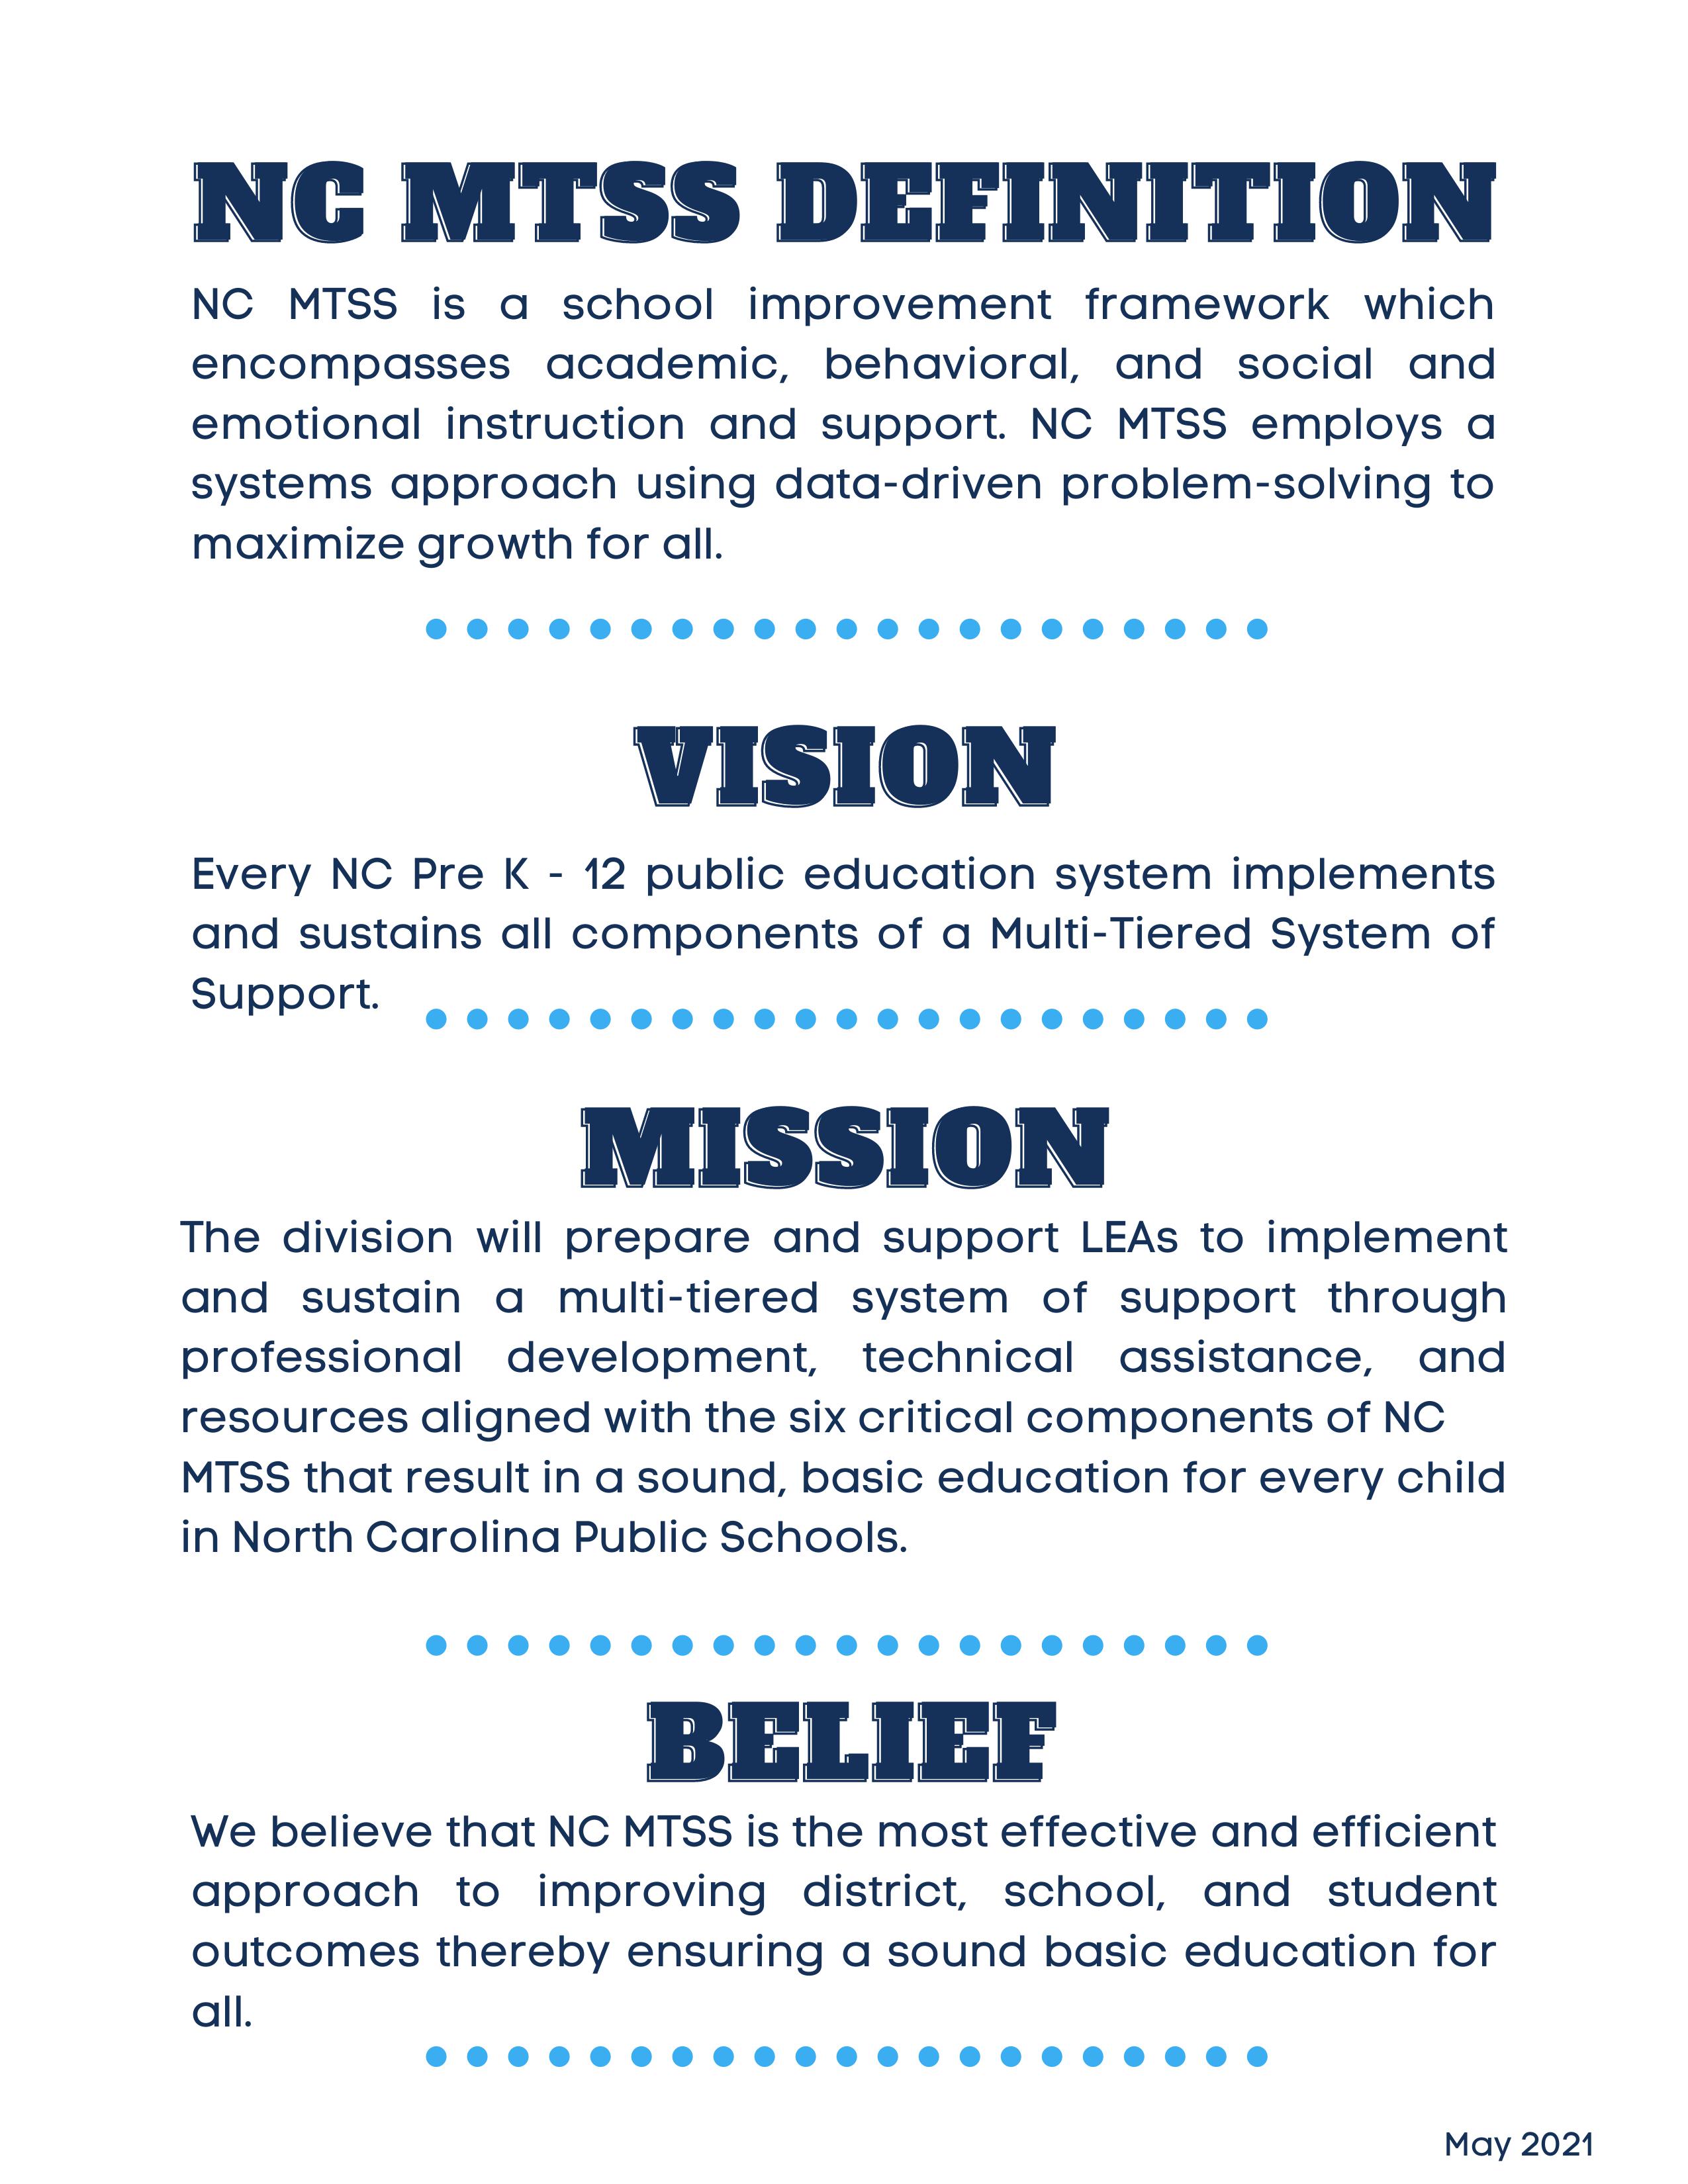 NC MTSS Vision and Mission